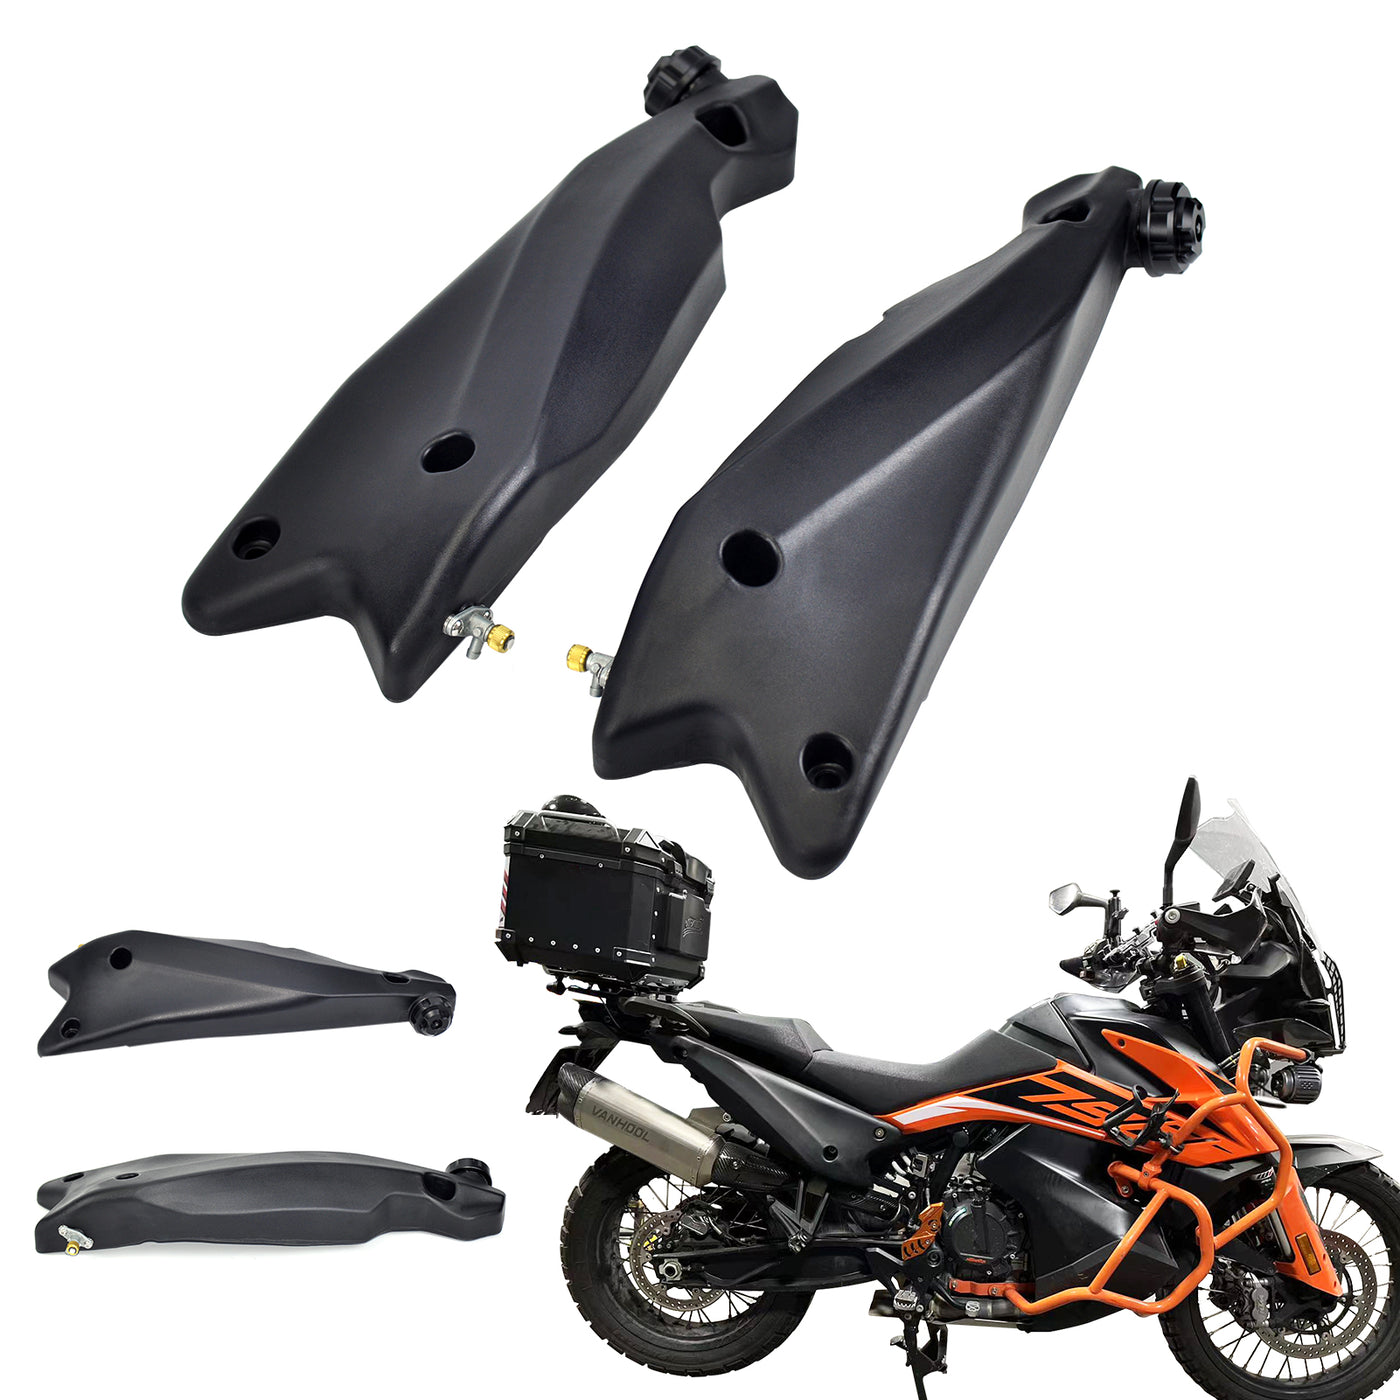 KTM Motorcycle Auxiliary Fuel Tank for KTM790 ADVENTURE (24.2x6.2x6.8 inches, 7L) Gasoline Container Gas Tank External Tank Auxiliary Tank for KTM790ADV.  KTM1090R Please Contact Us